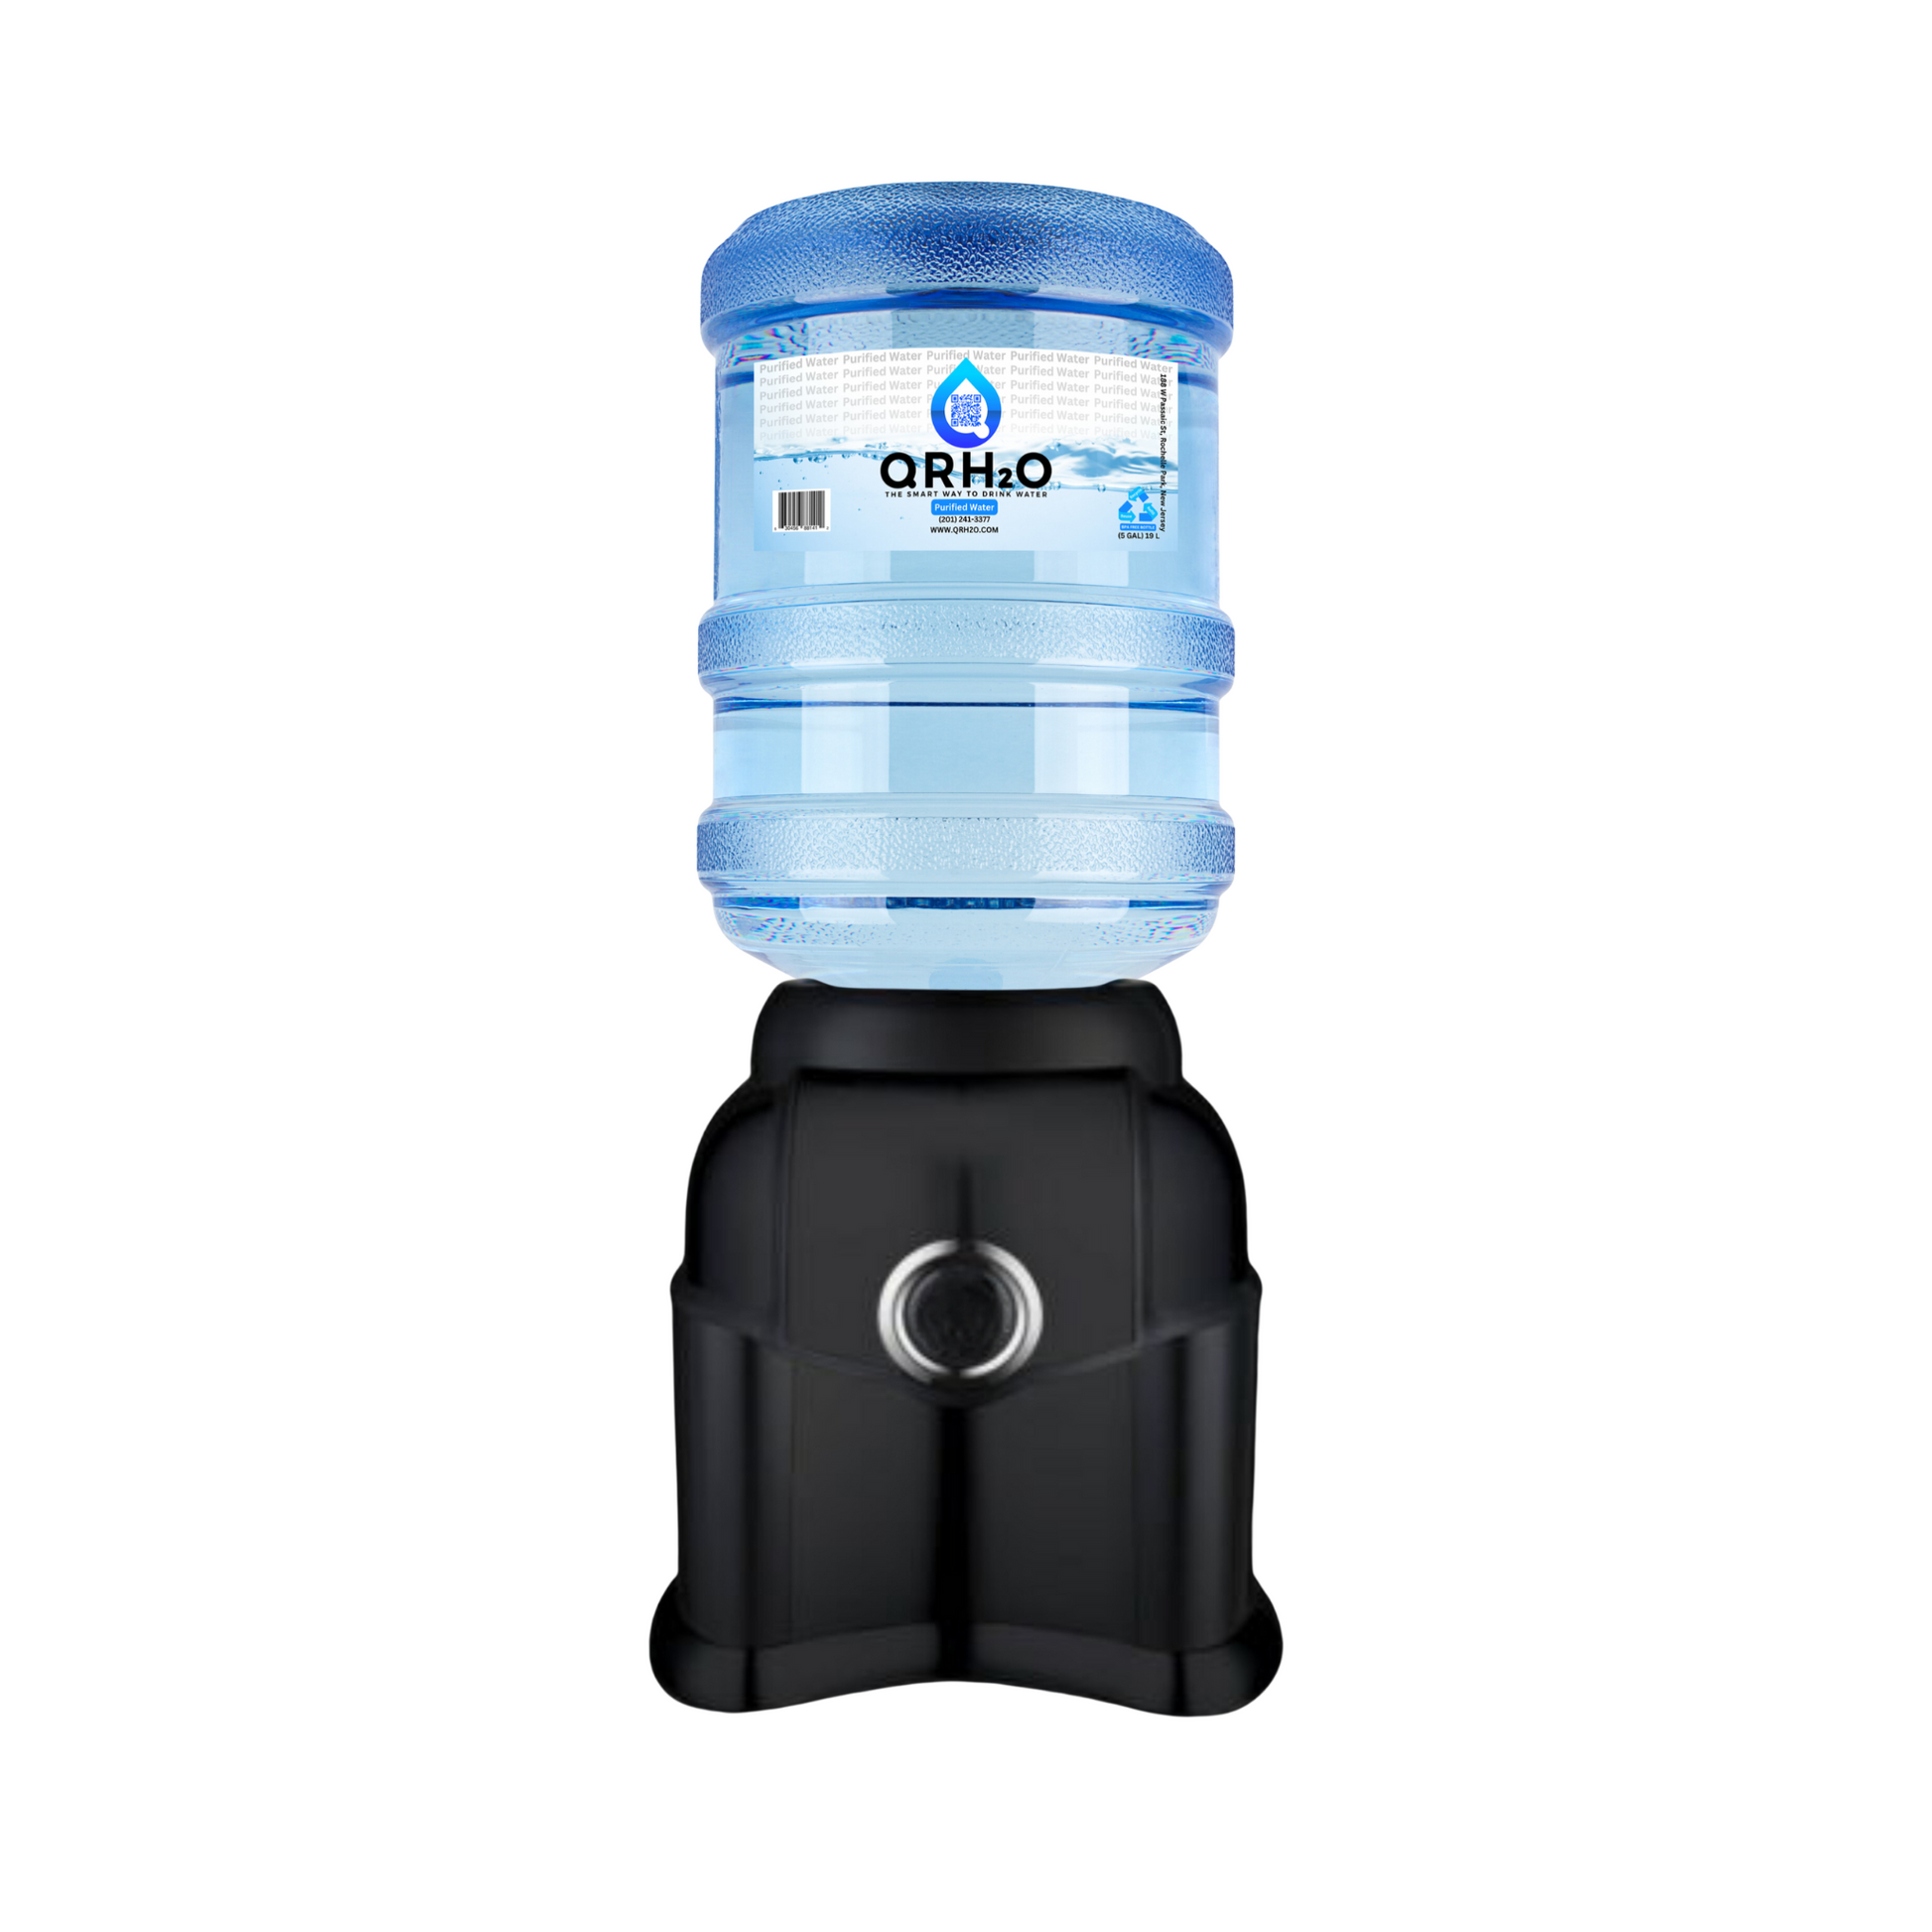 Upgrade your hydration routine with our 4-pack of 5-gallon waters and countertop dispenser, offering a choice of alkaline or purified water at room temperature.